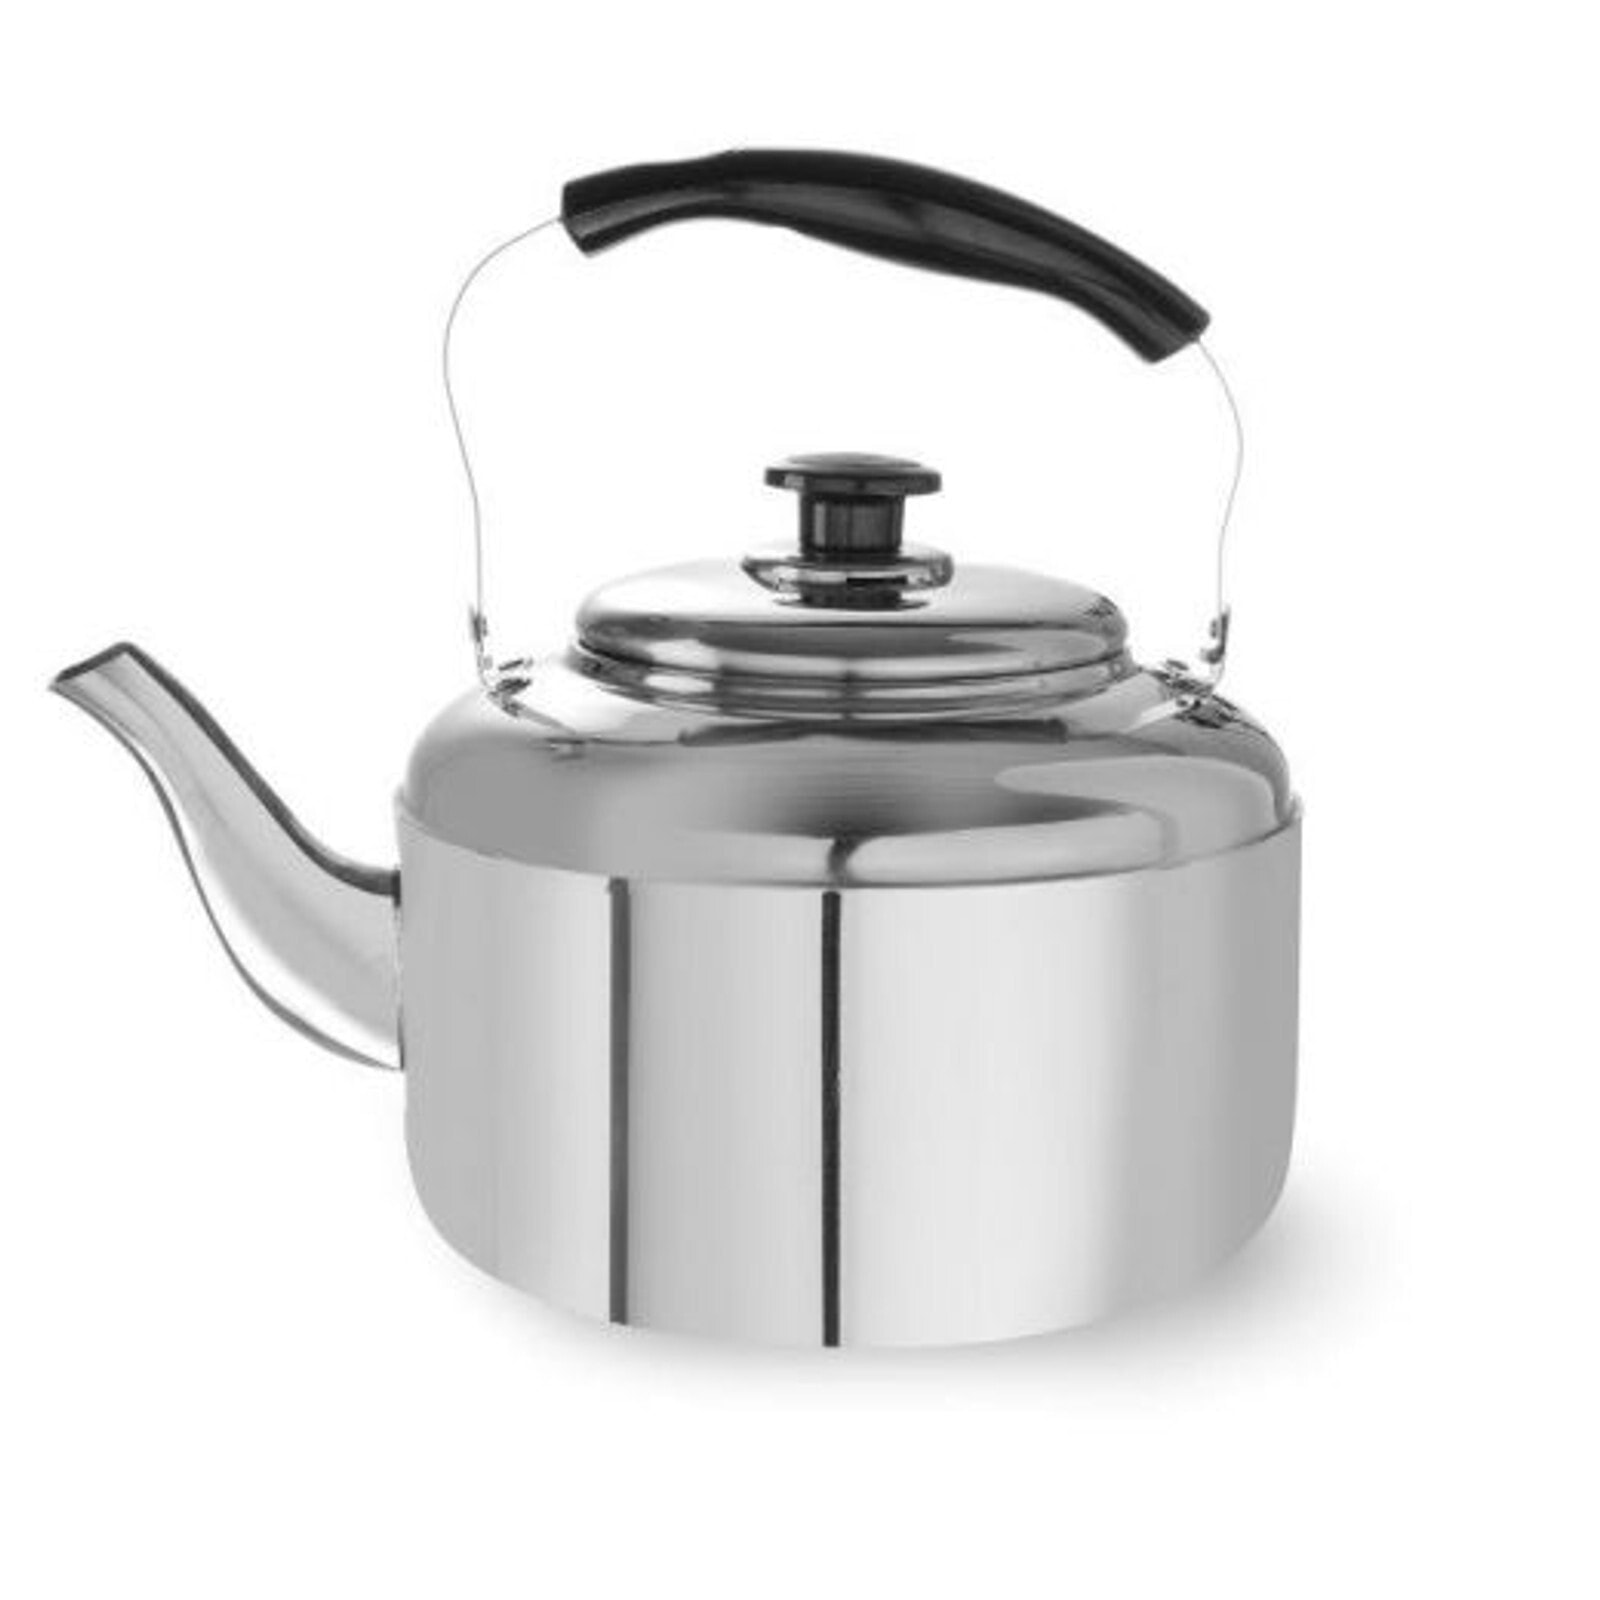 Stainless steel kettle with lid 6l - Hendi 624302